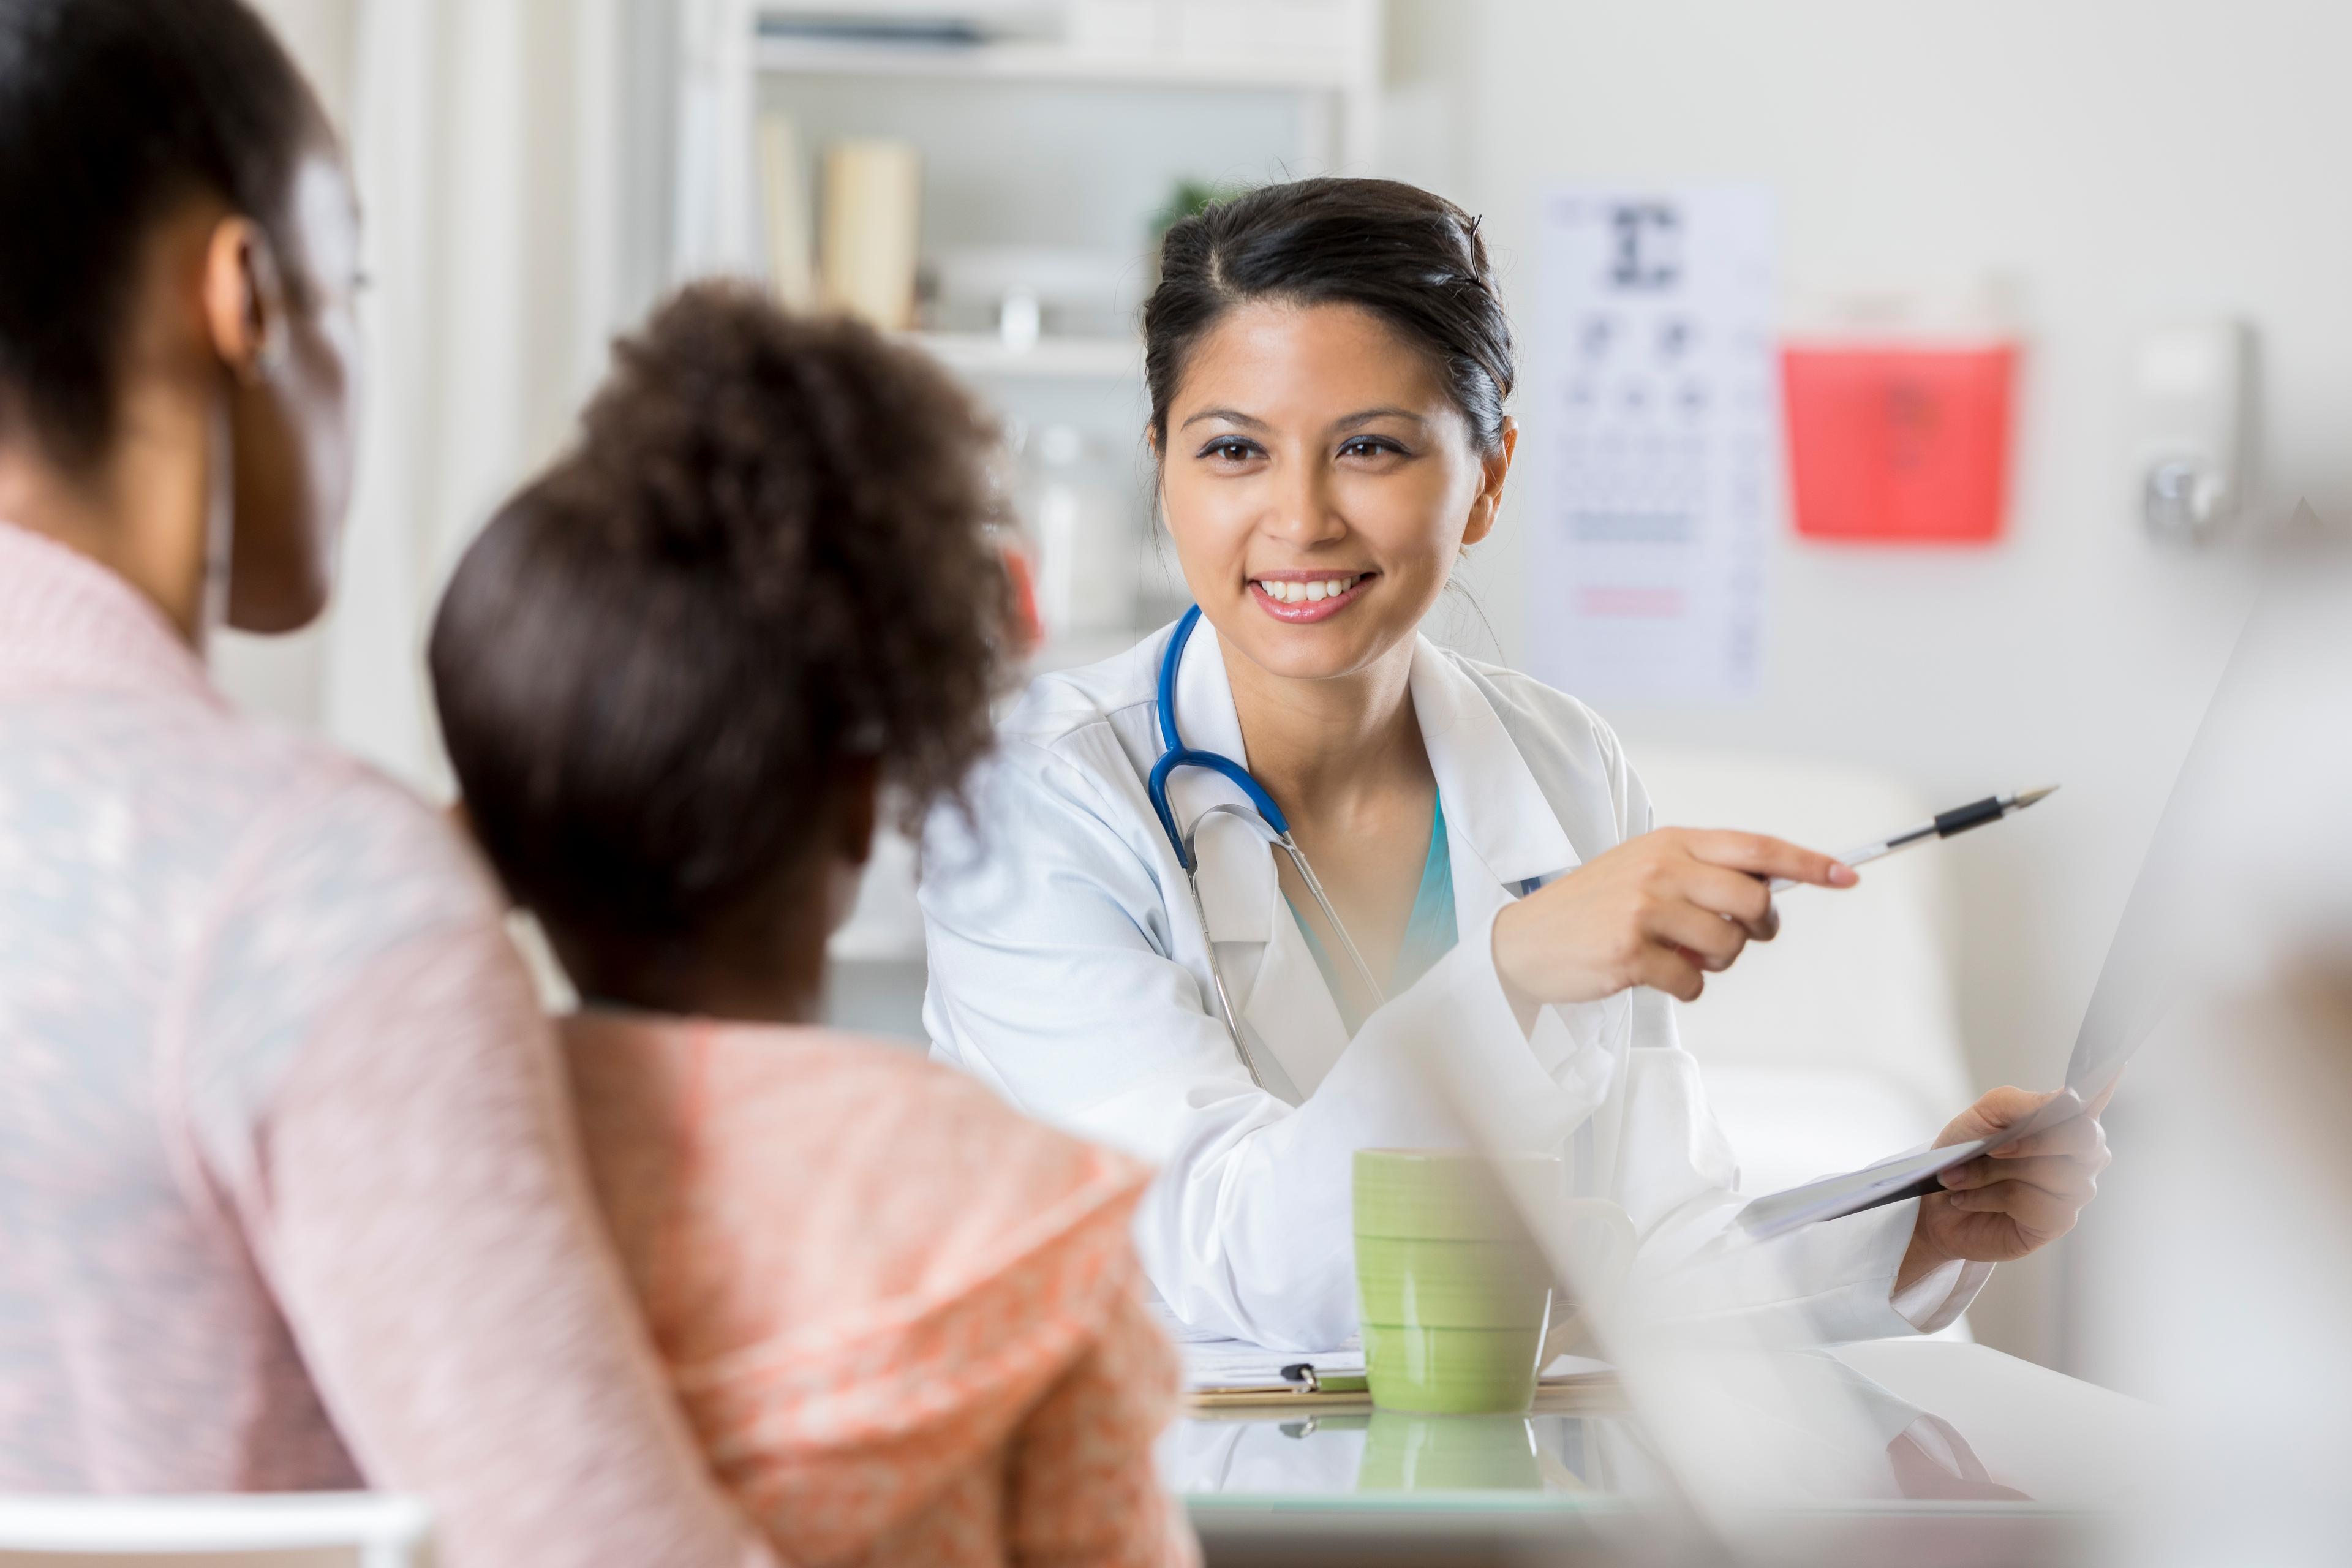 role of family nurse practitioner - picture of an FNP speaking with a mom and her daughter.